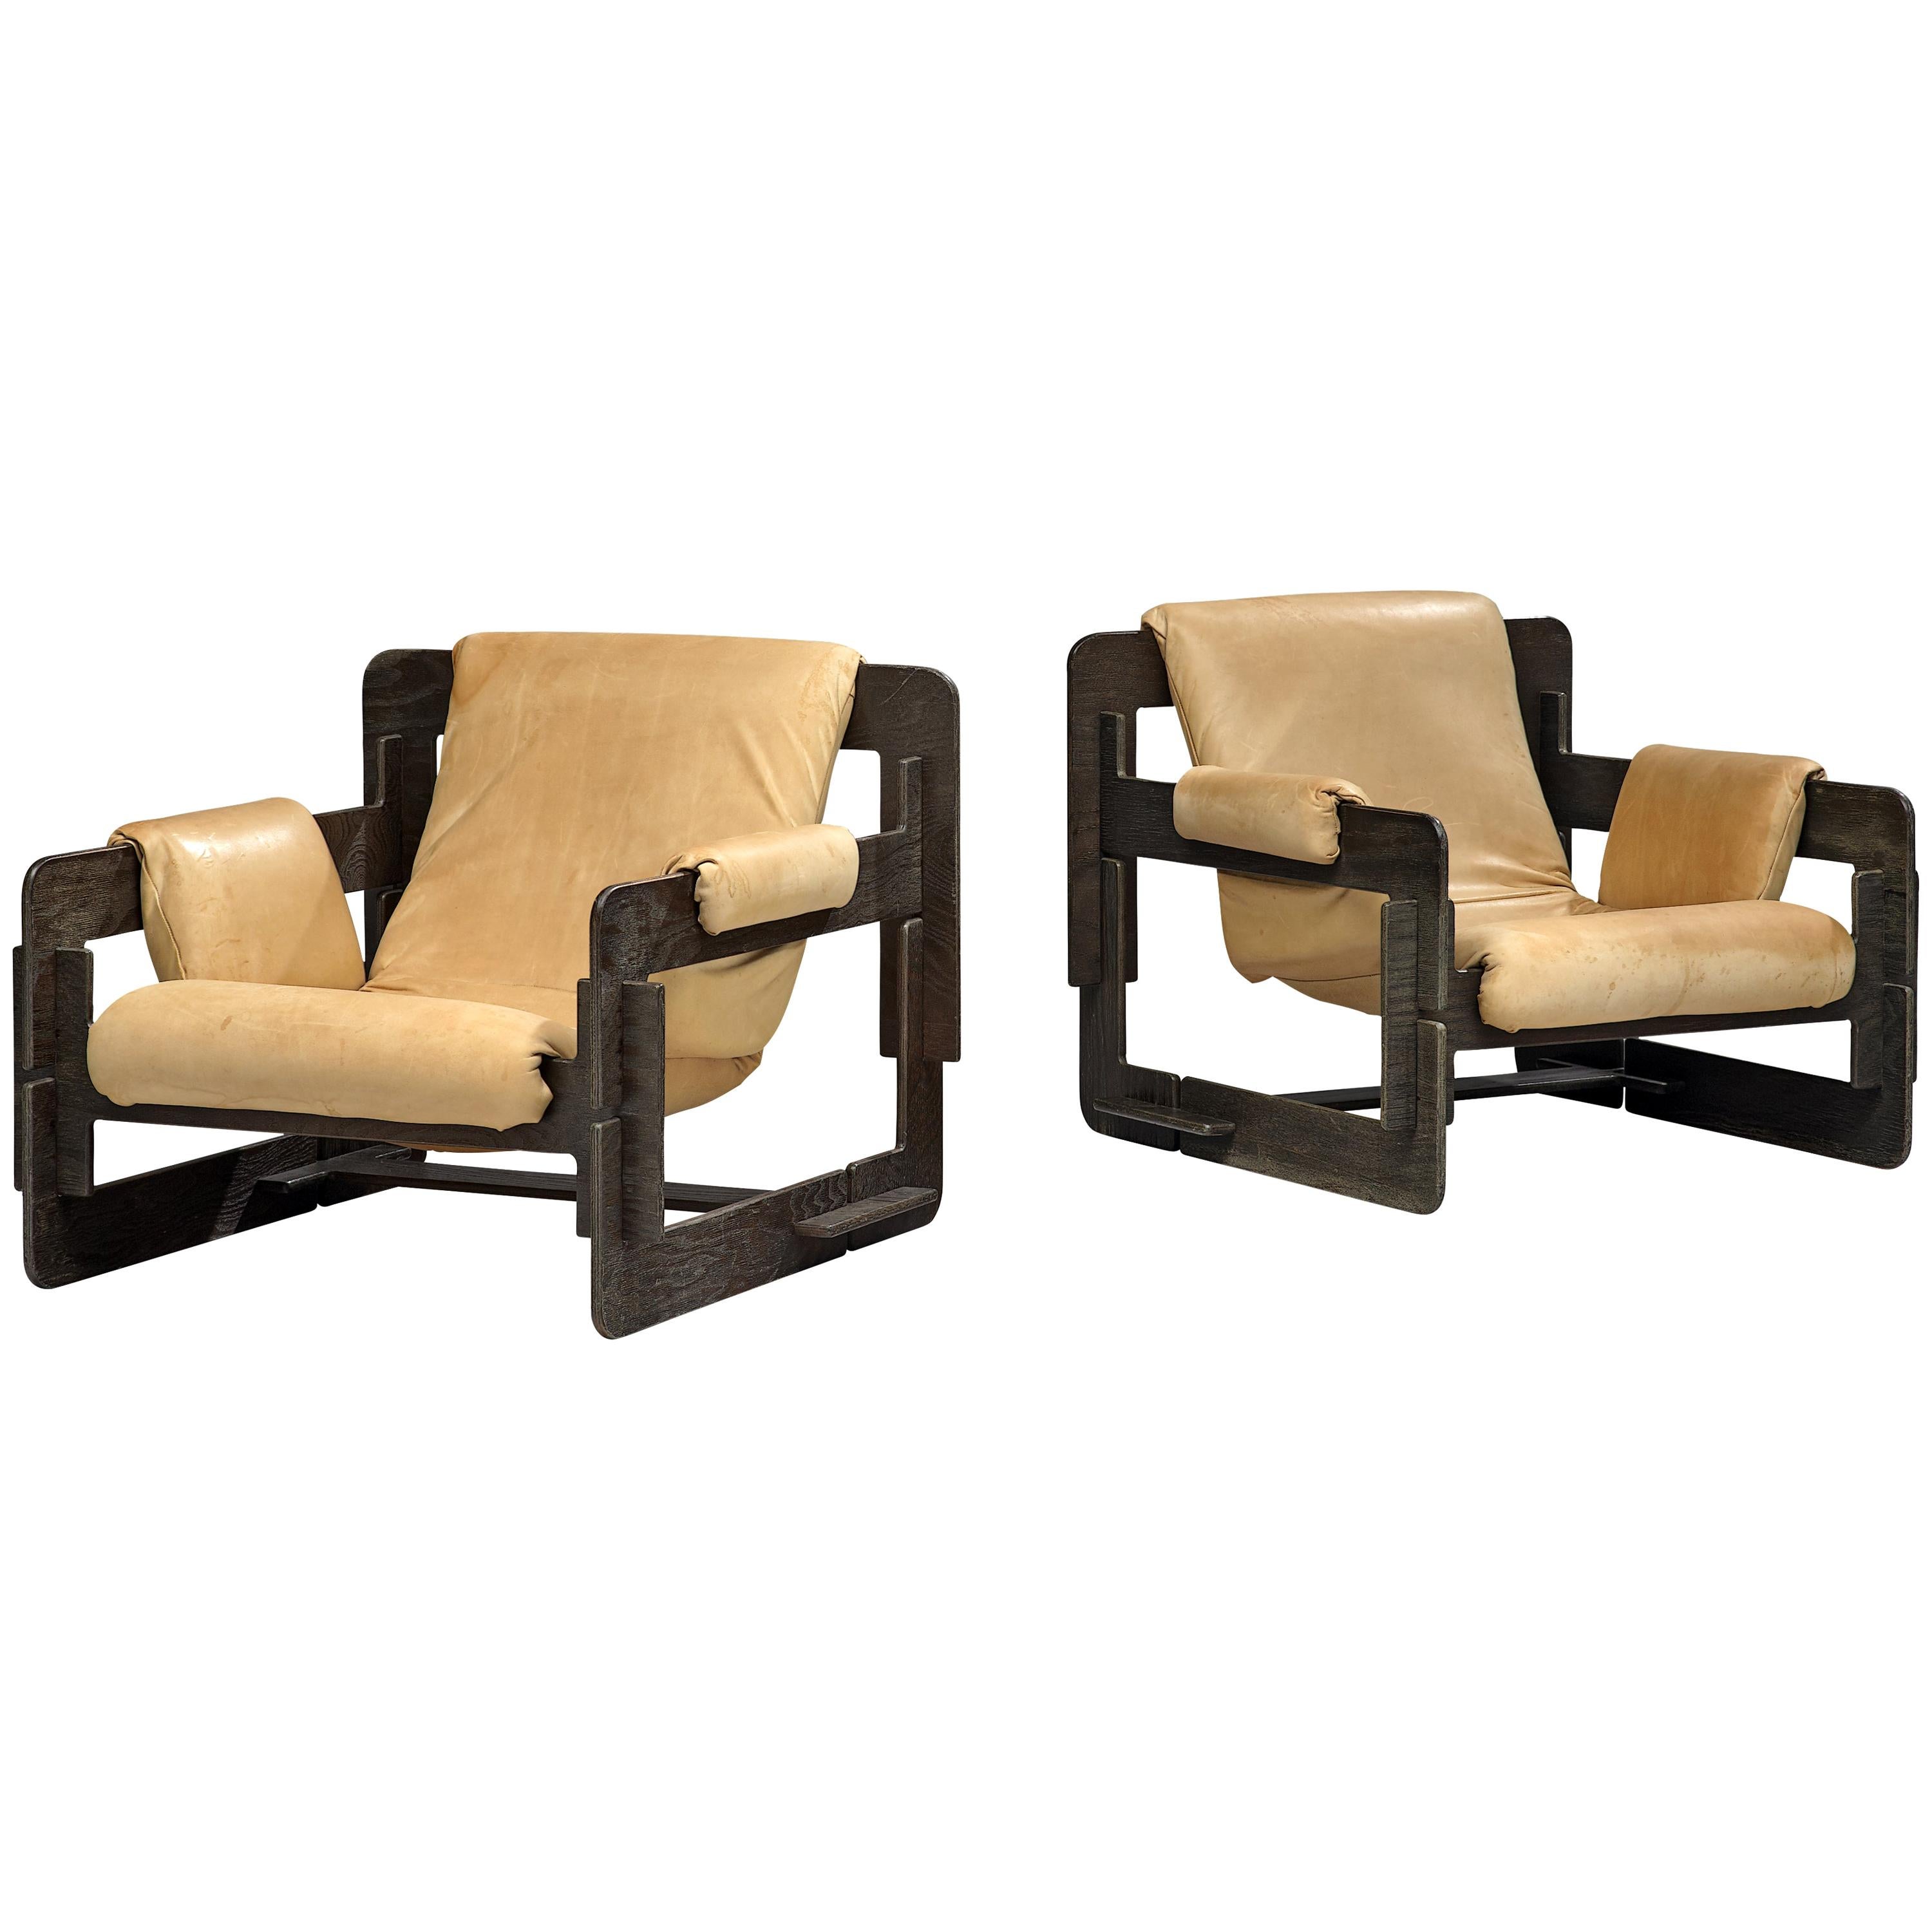 Arne Jacobsen Pair of 'Rover' Lounge Chairs in Wood and Leather